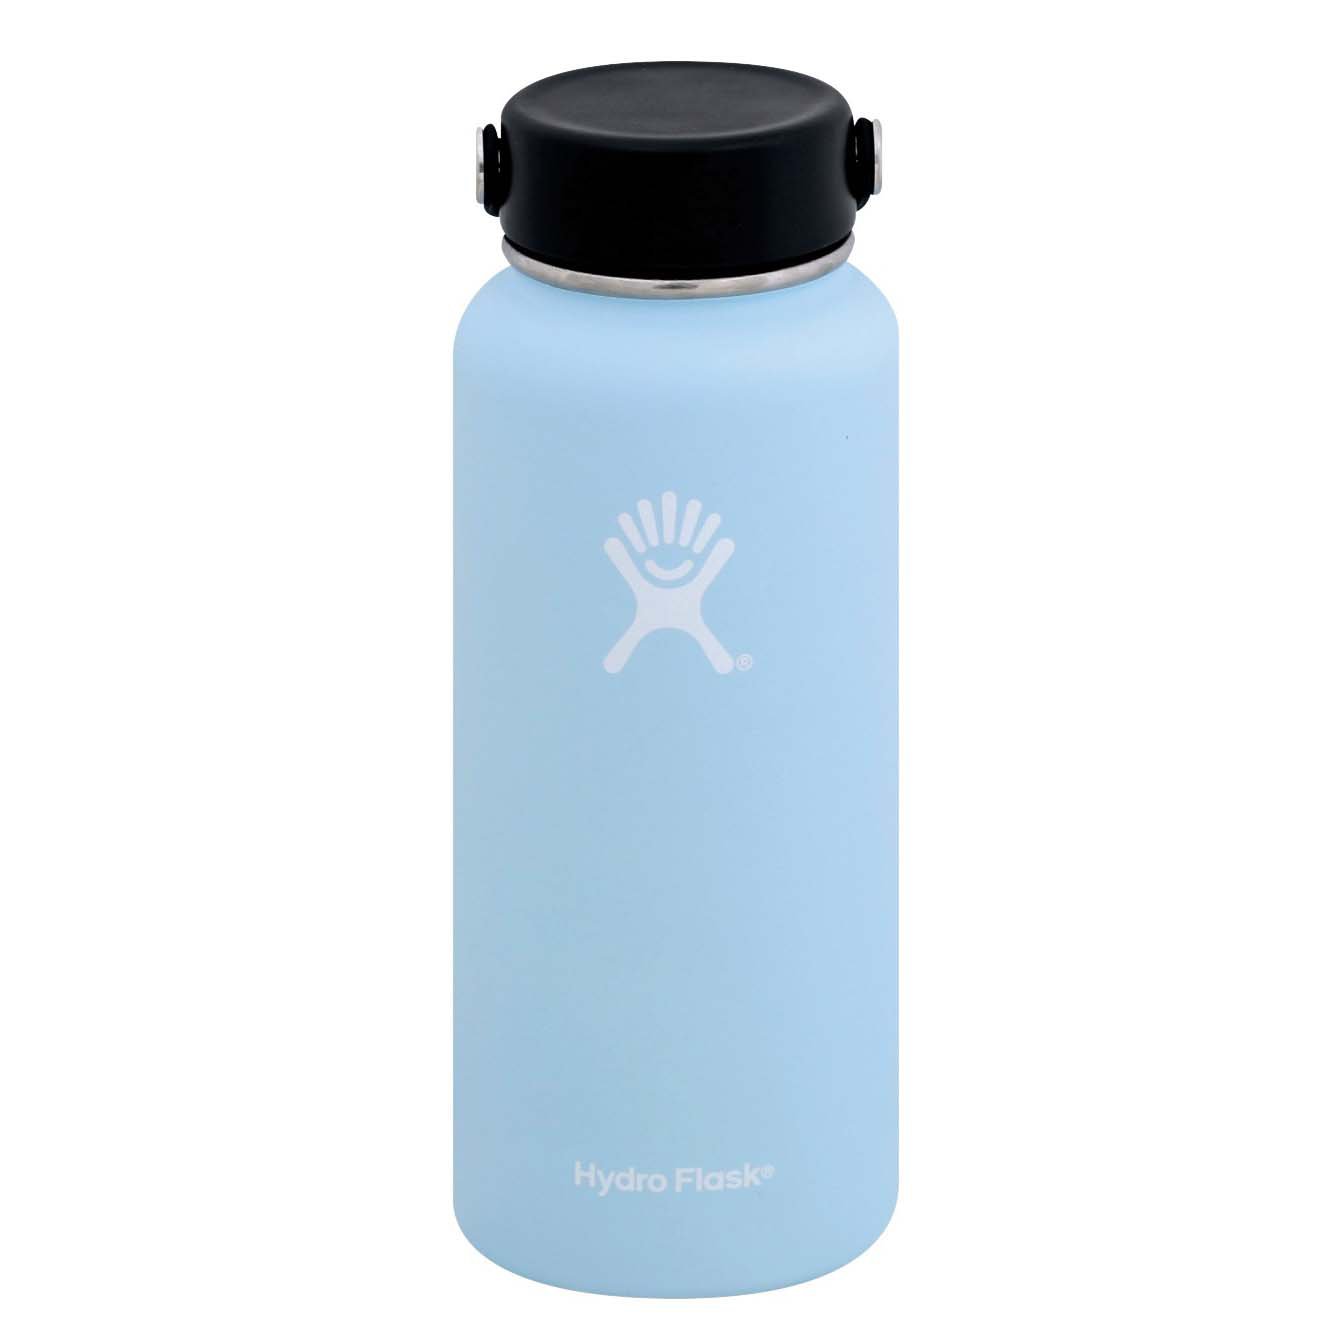 Hydro Flask Food Flask Pacific - Shop Food Storage at H-E-B